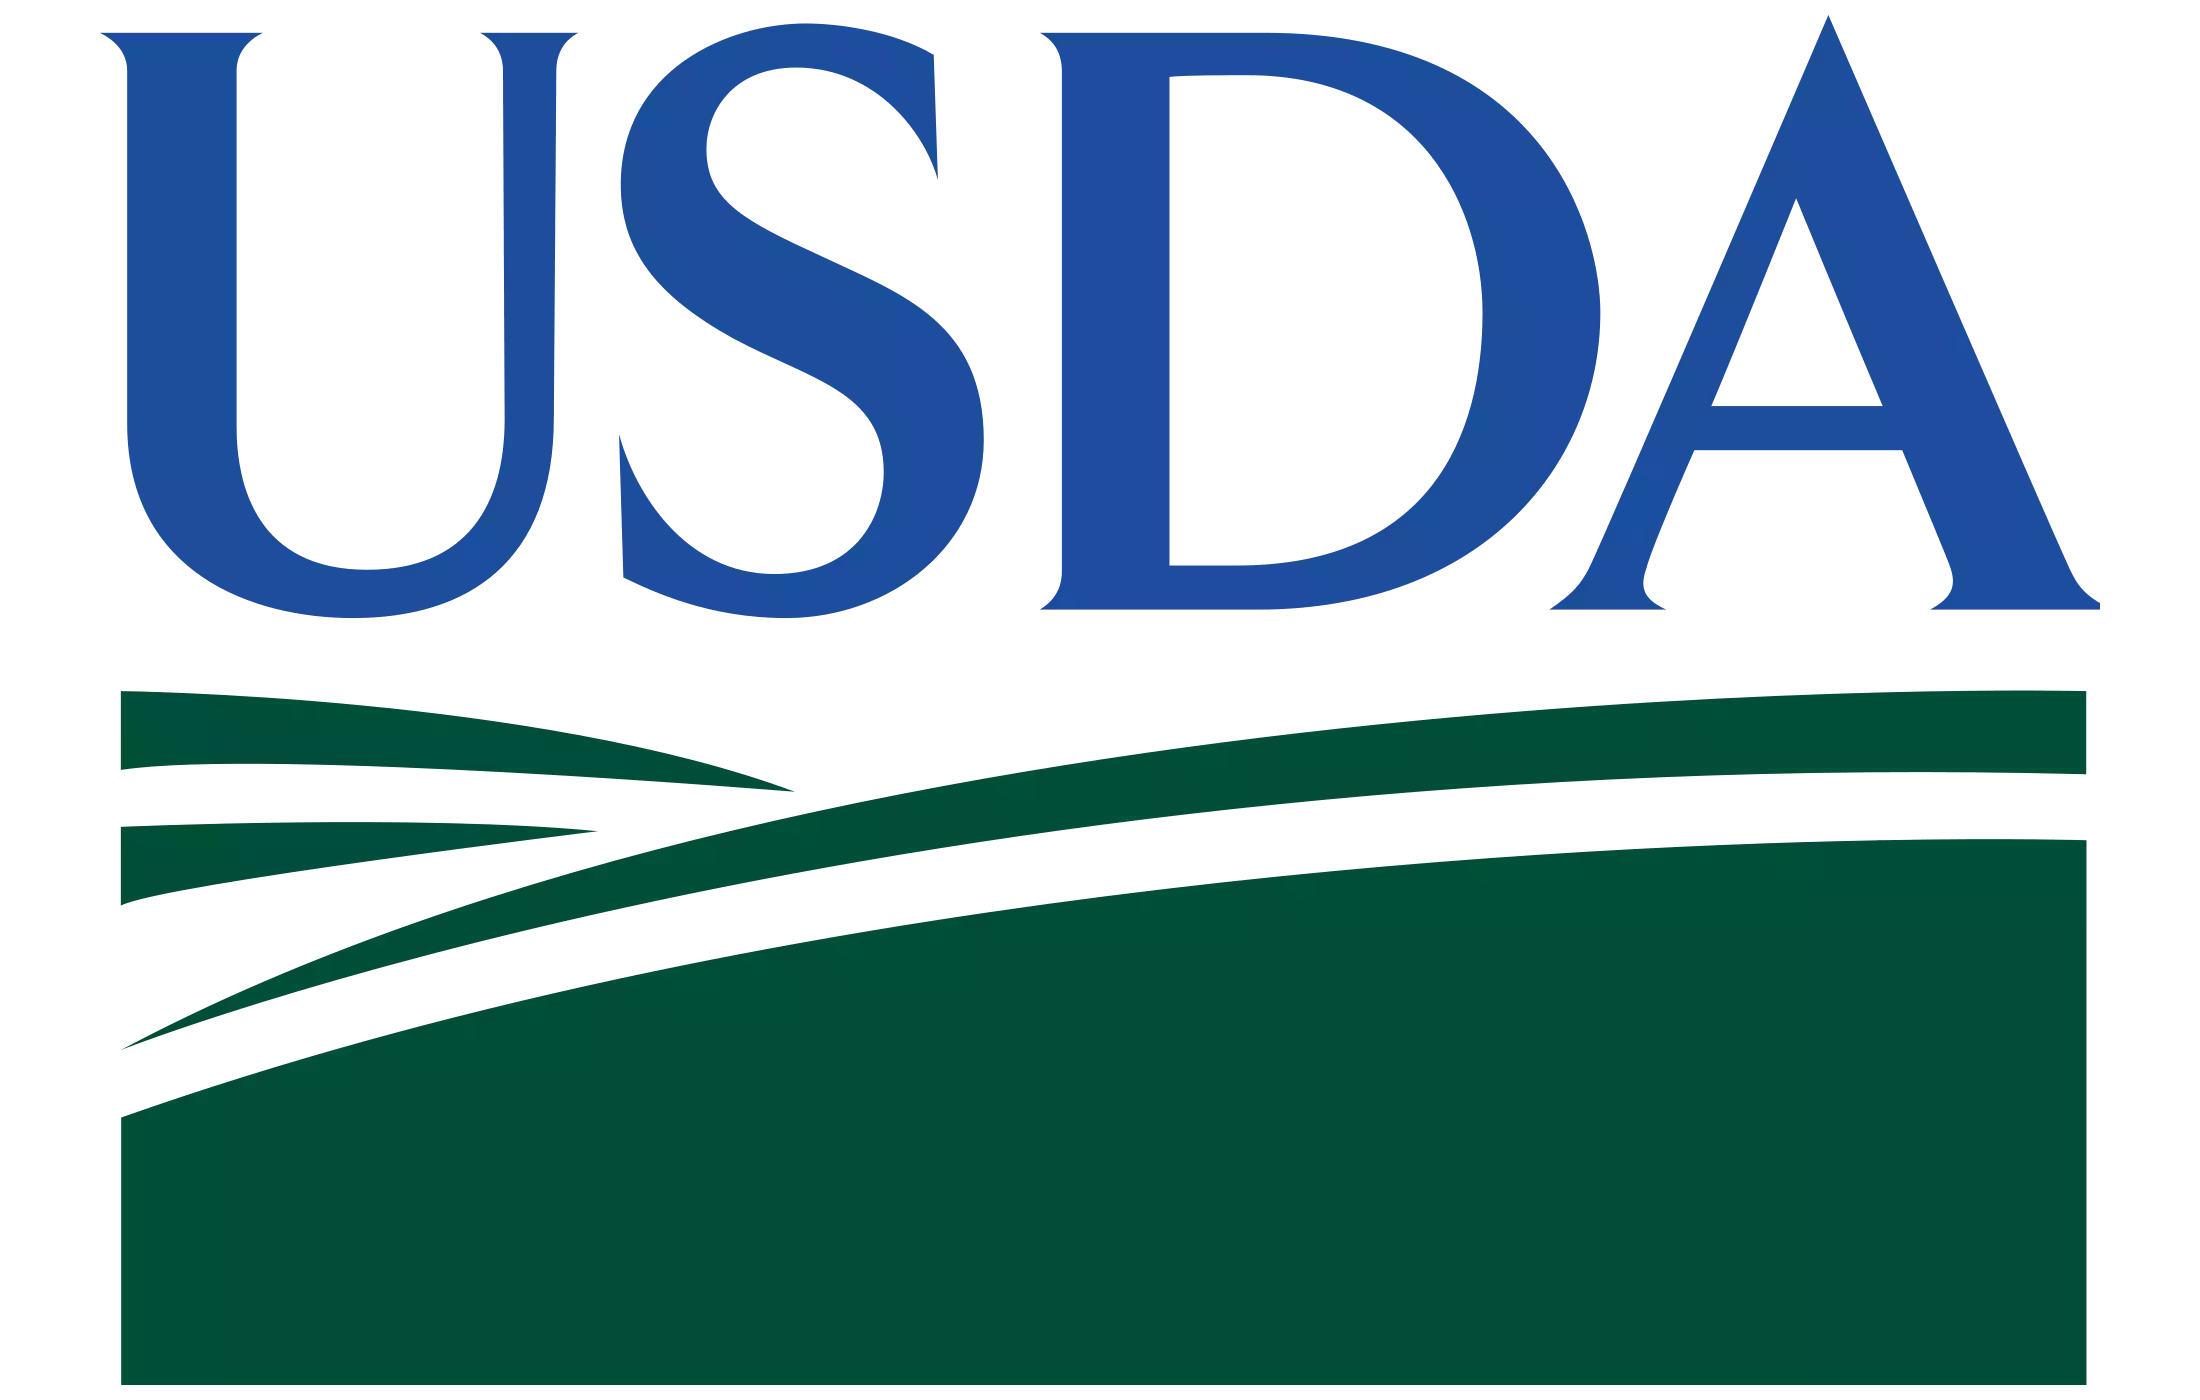 United States Department of Agriculture (USDA) Scholarship programs